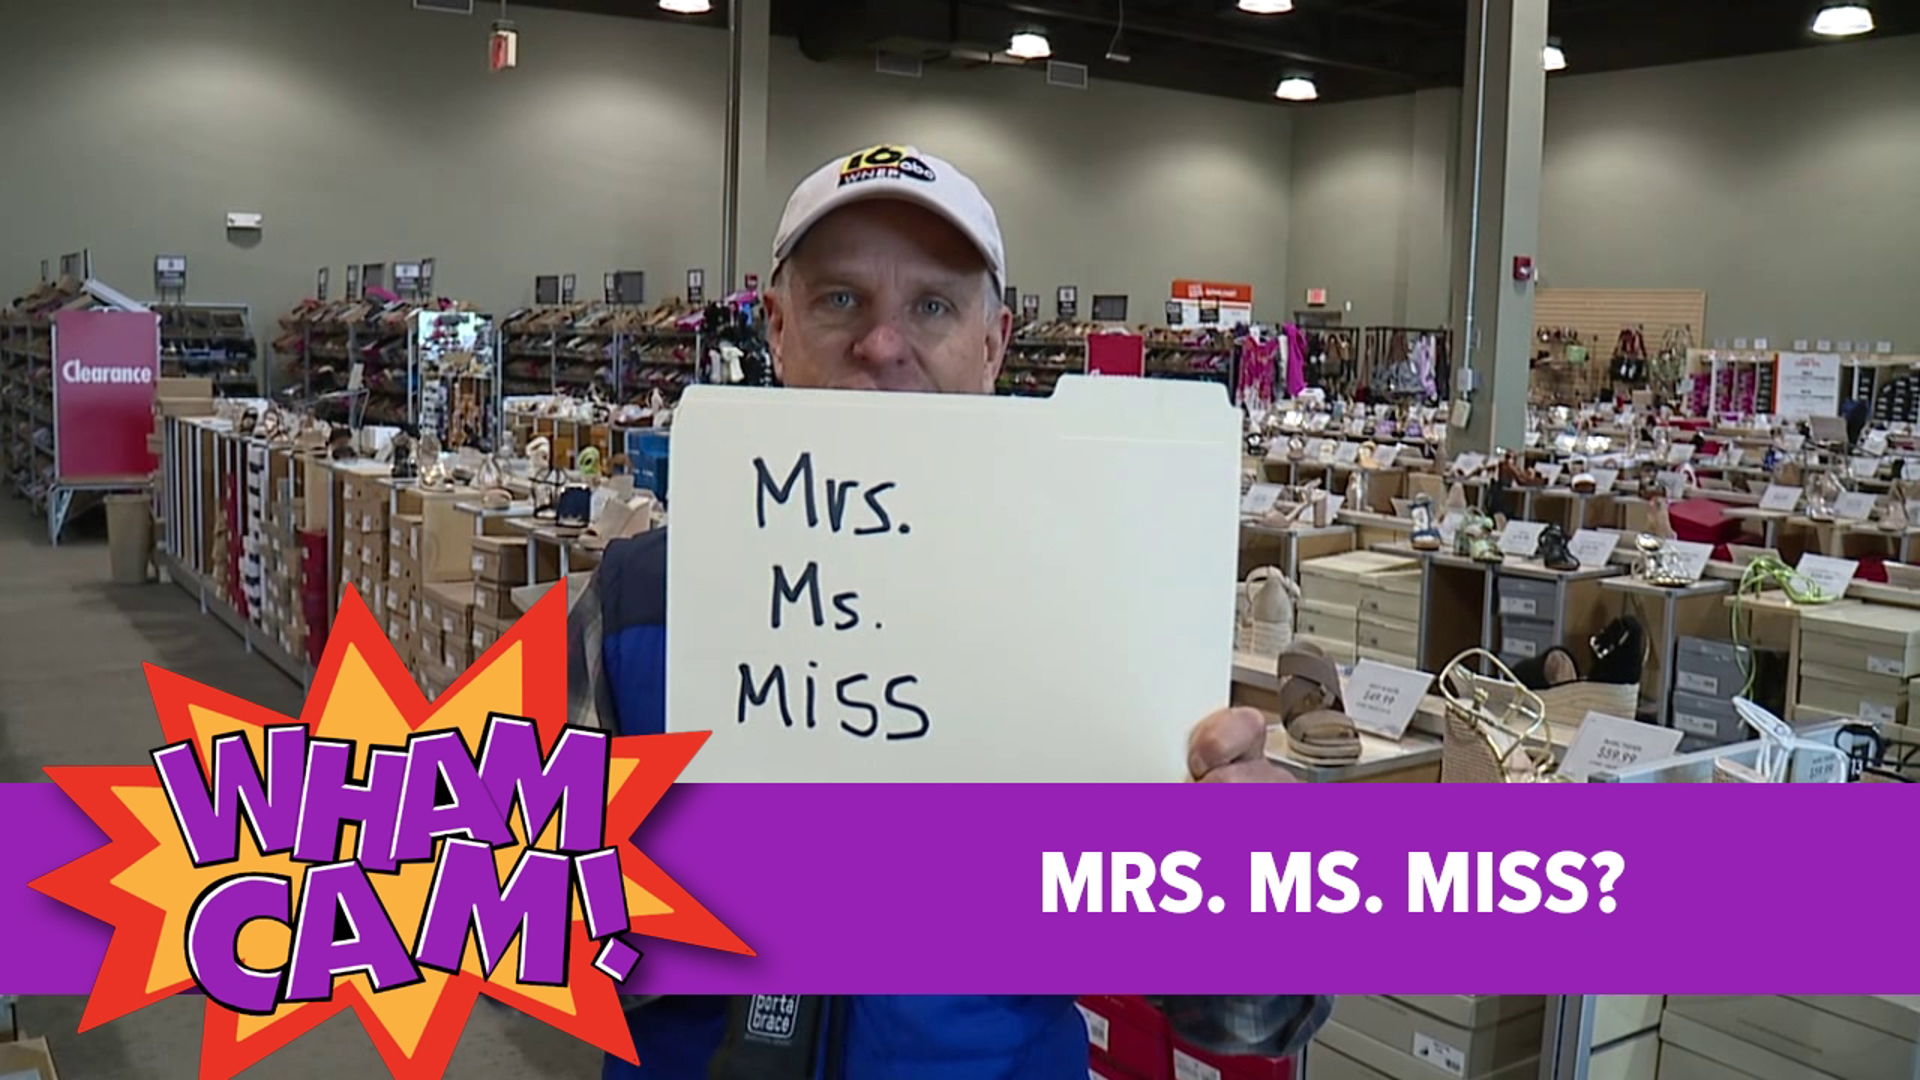 With Mother's Day nearing, Joe's thinking about the women in his life. He's wondering where Mrs. & miss comes from? He was in Moosic to see if anyone had the answer.